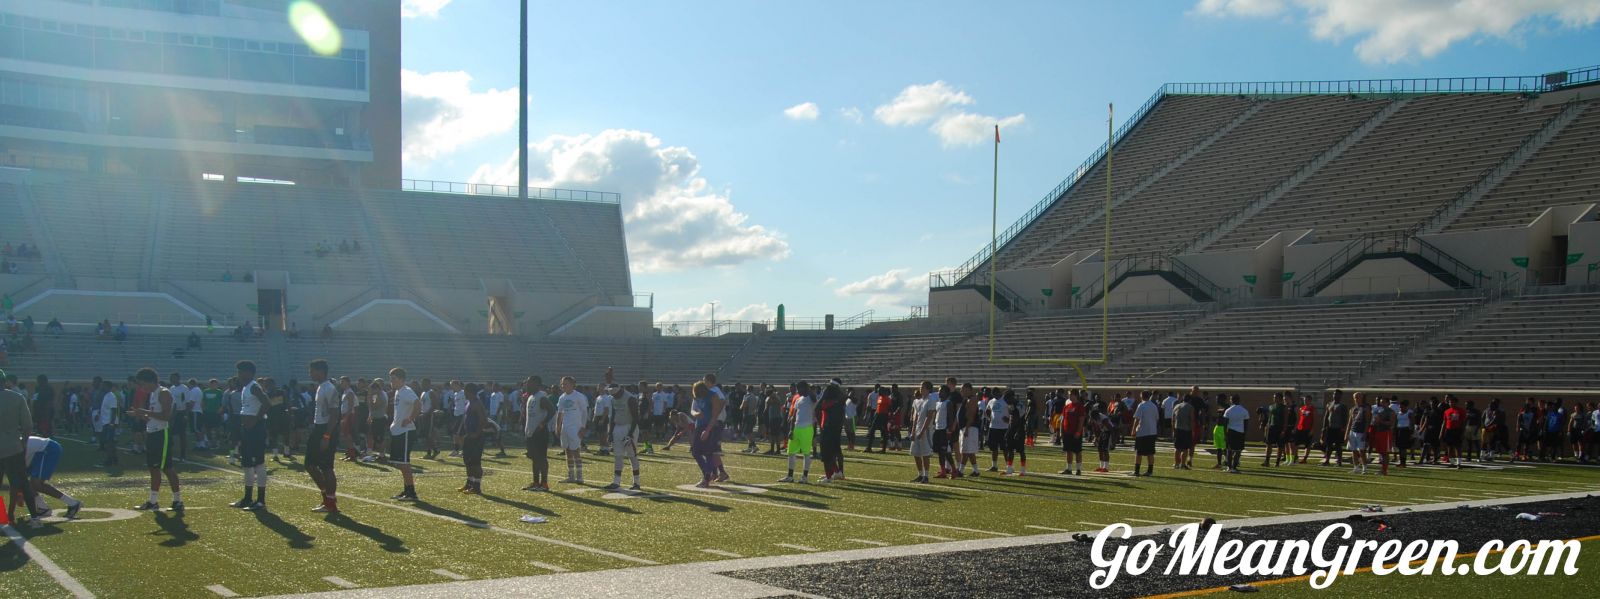 Recruits seemed to line up the length Of the stadium